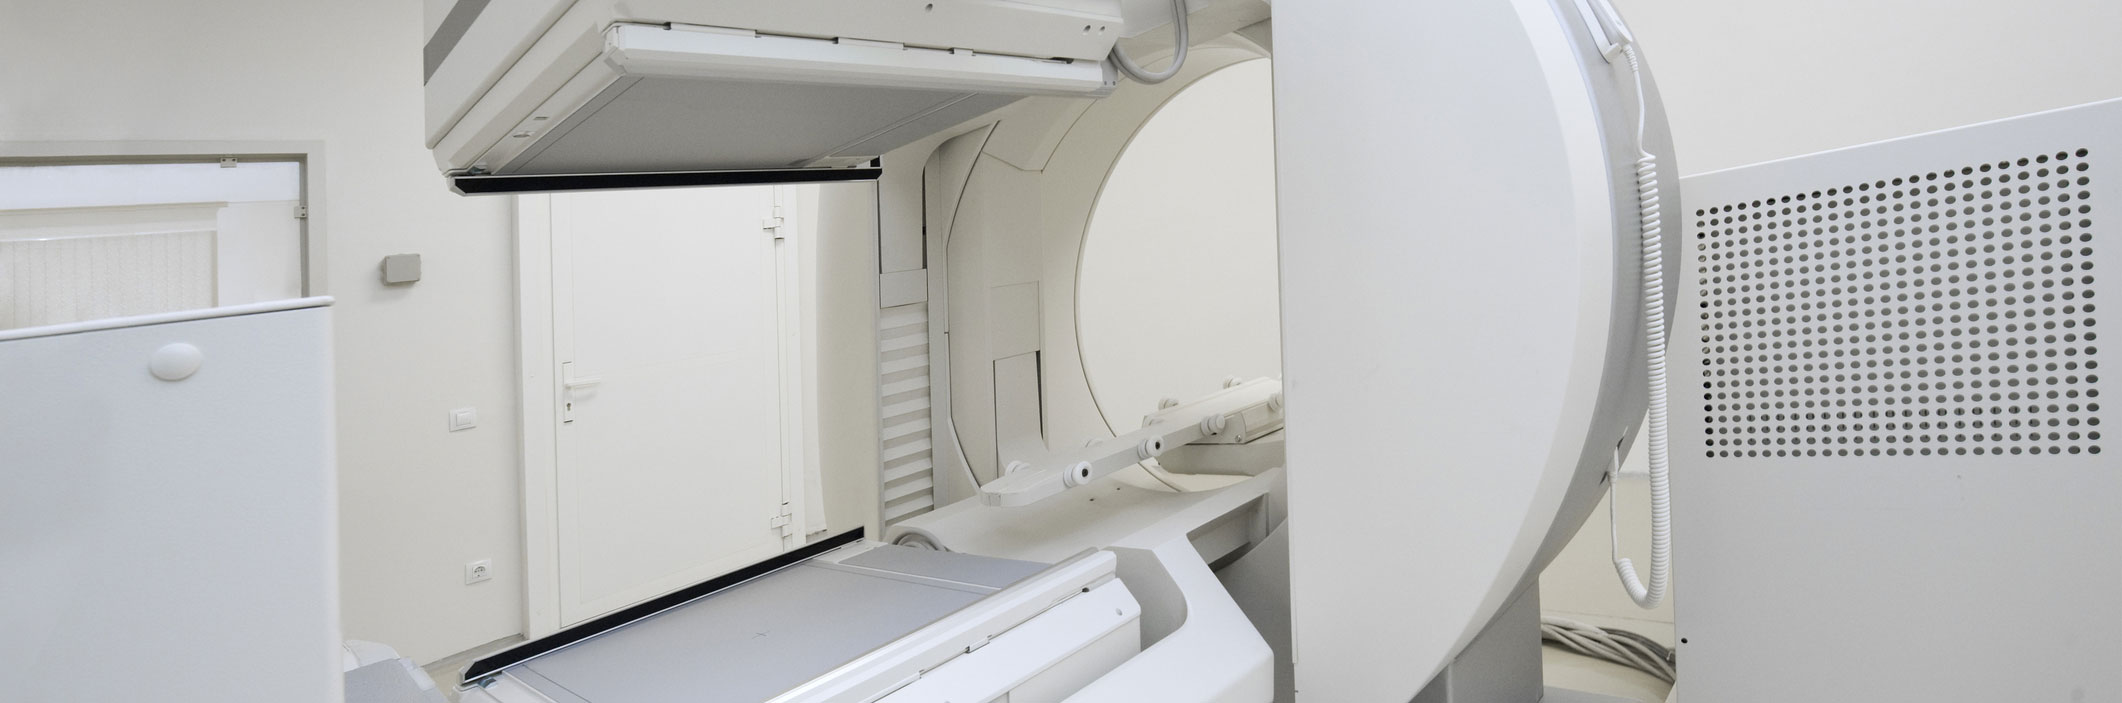 Radiation therapy equipment